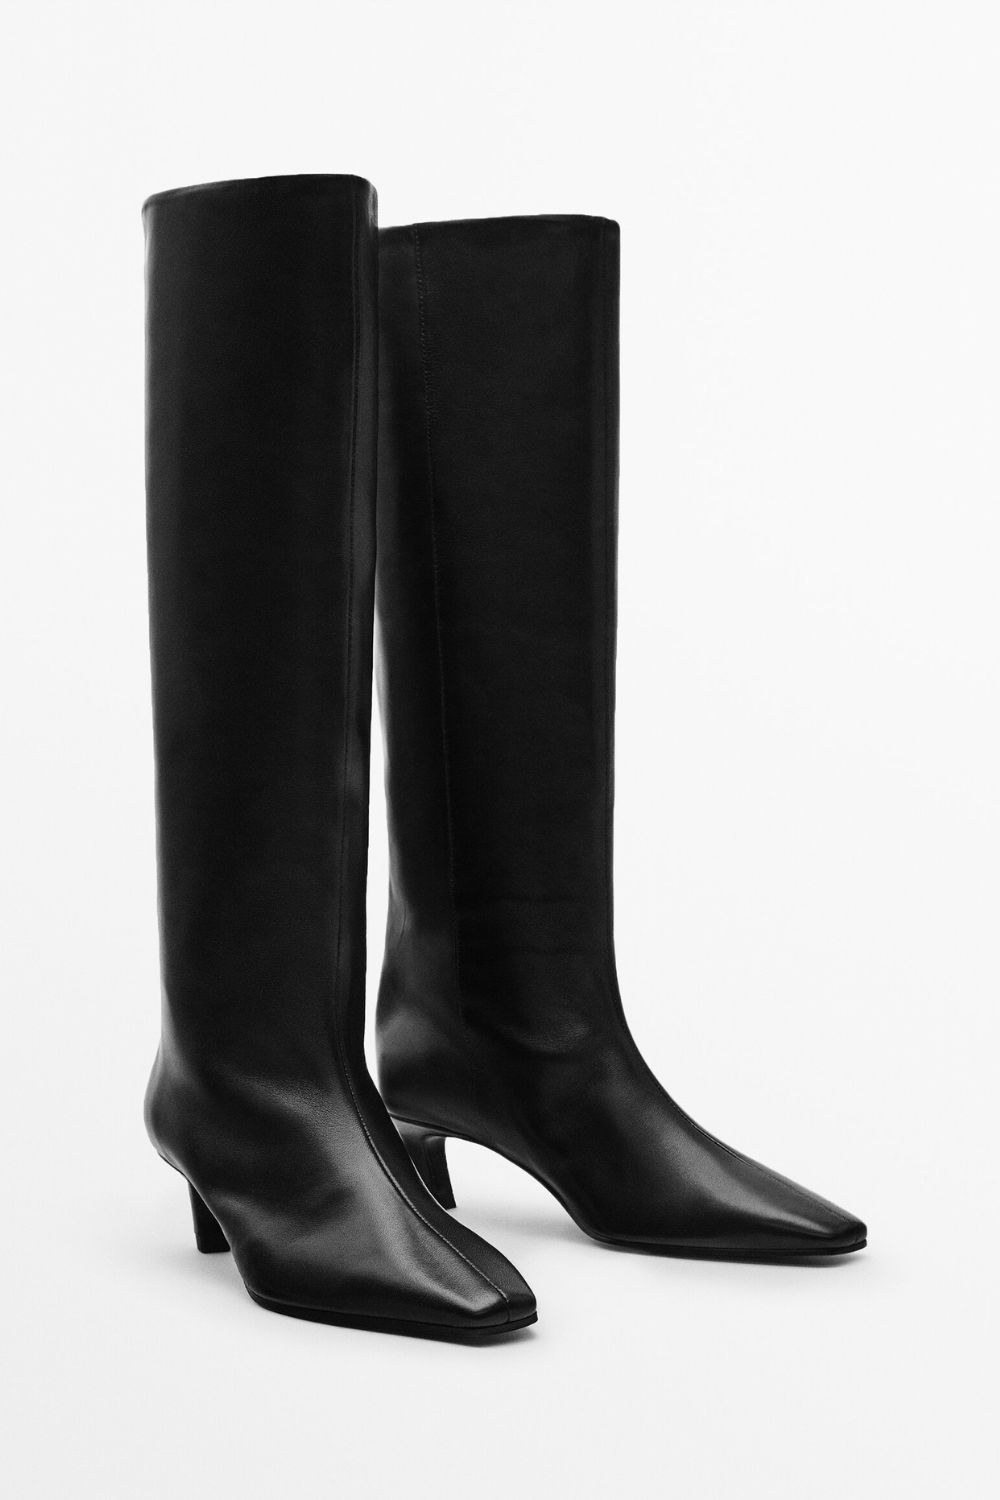 The-Gloss-Magazine-best-boot-trends-to-know-now-6